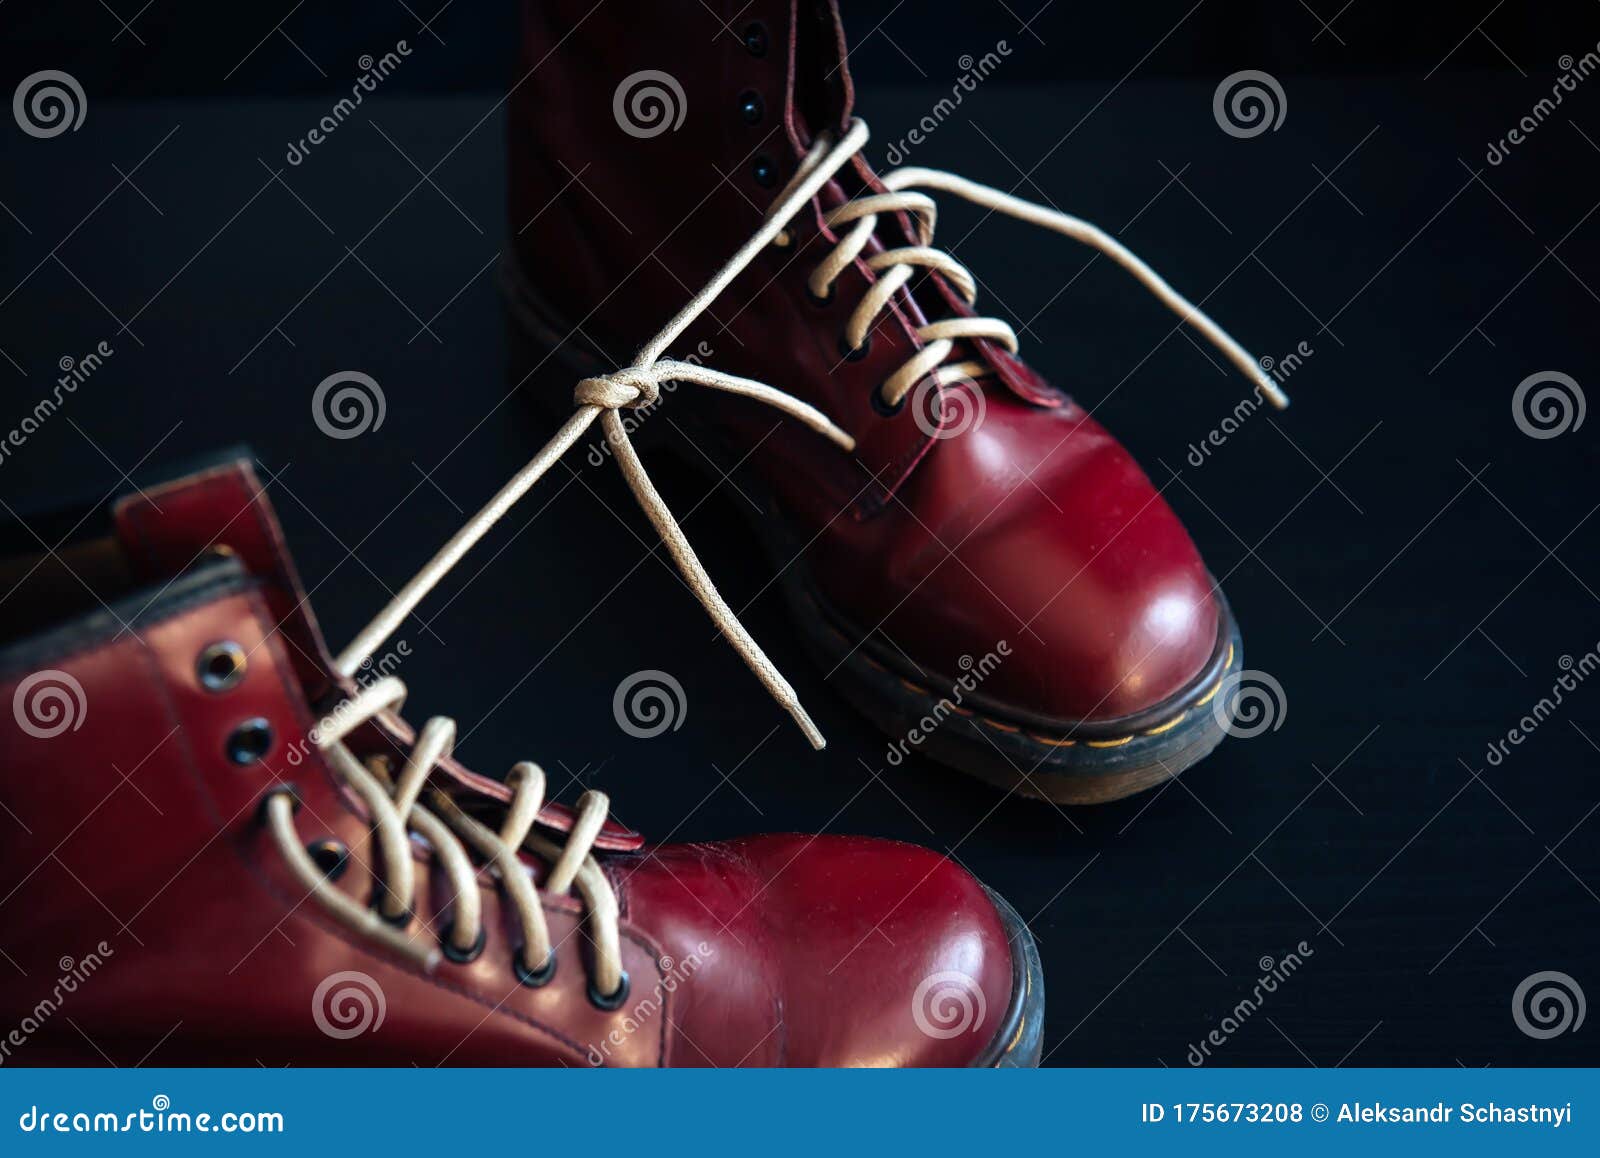 Stylish Red Shoes With Laces Tied Together On Black Background ...